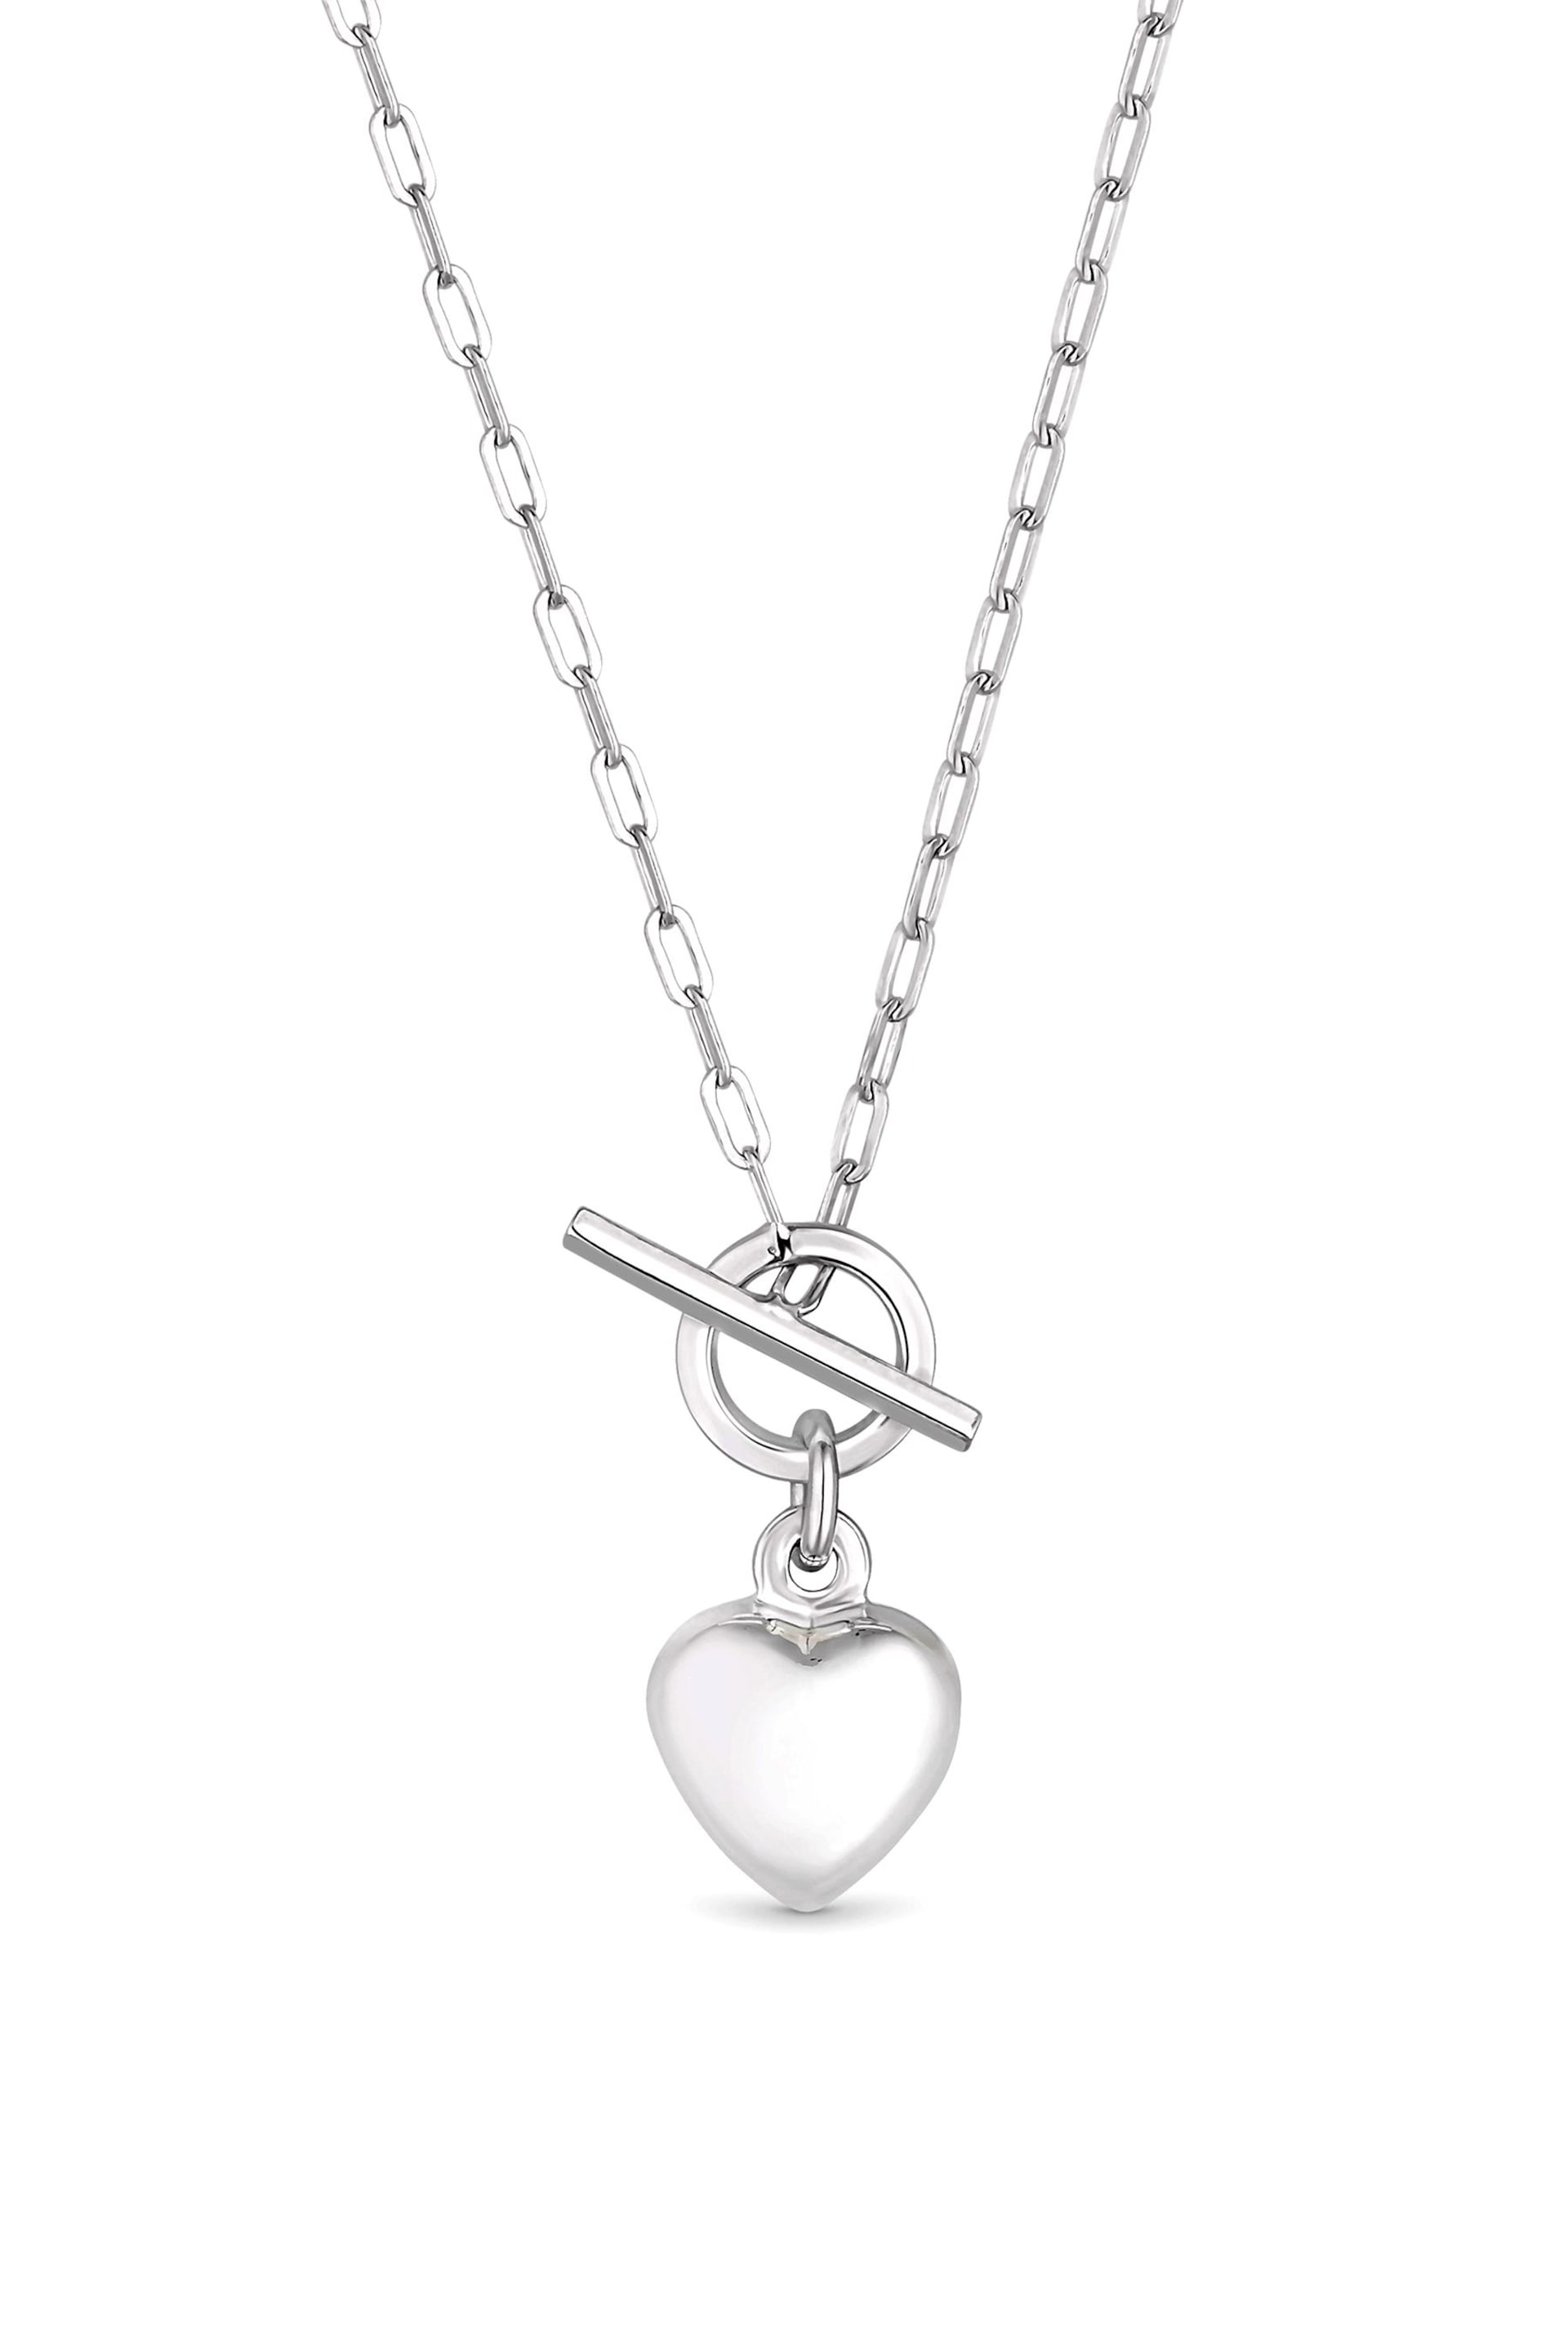 Simply Silver Sterling Silver Tone 925 Puff Heart T Bar Necklace - Image 1 of 4